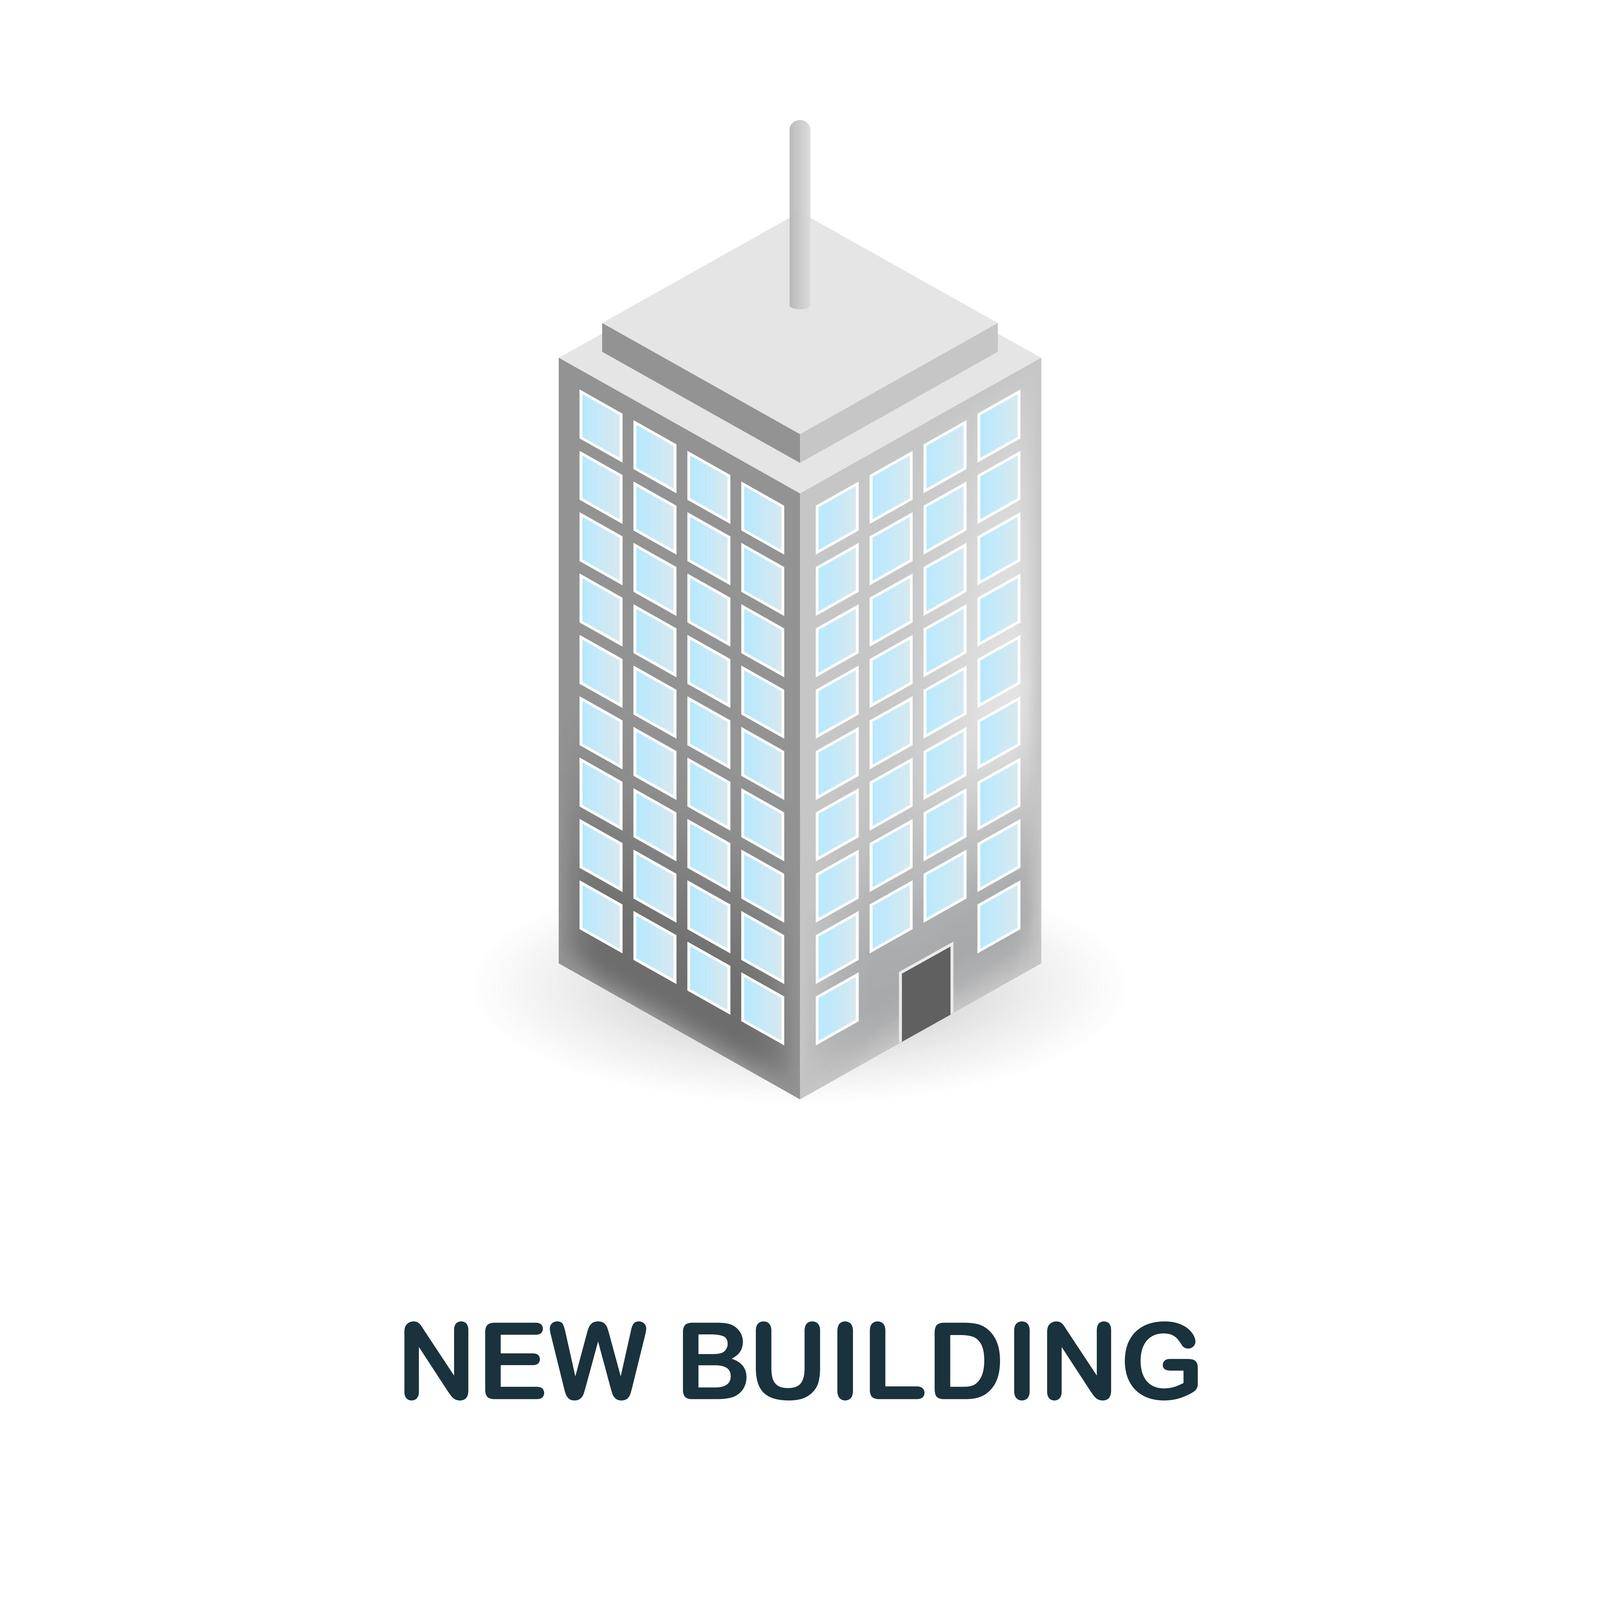 New Building 3d icon Simple element from buildings collection. Creative New Building icon for web design, templates, infographics and more by simakovavector